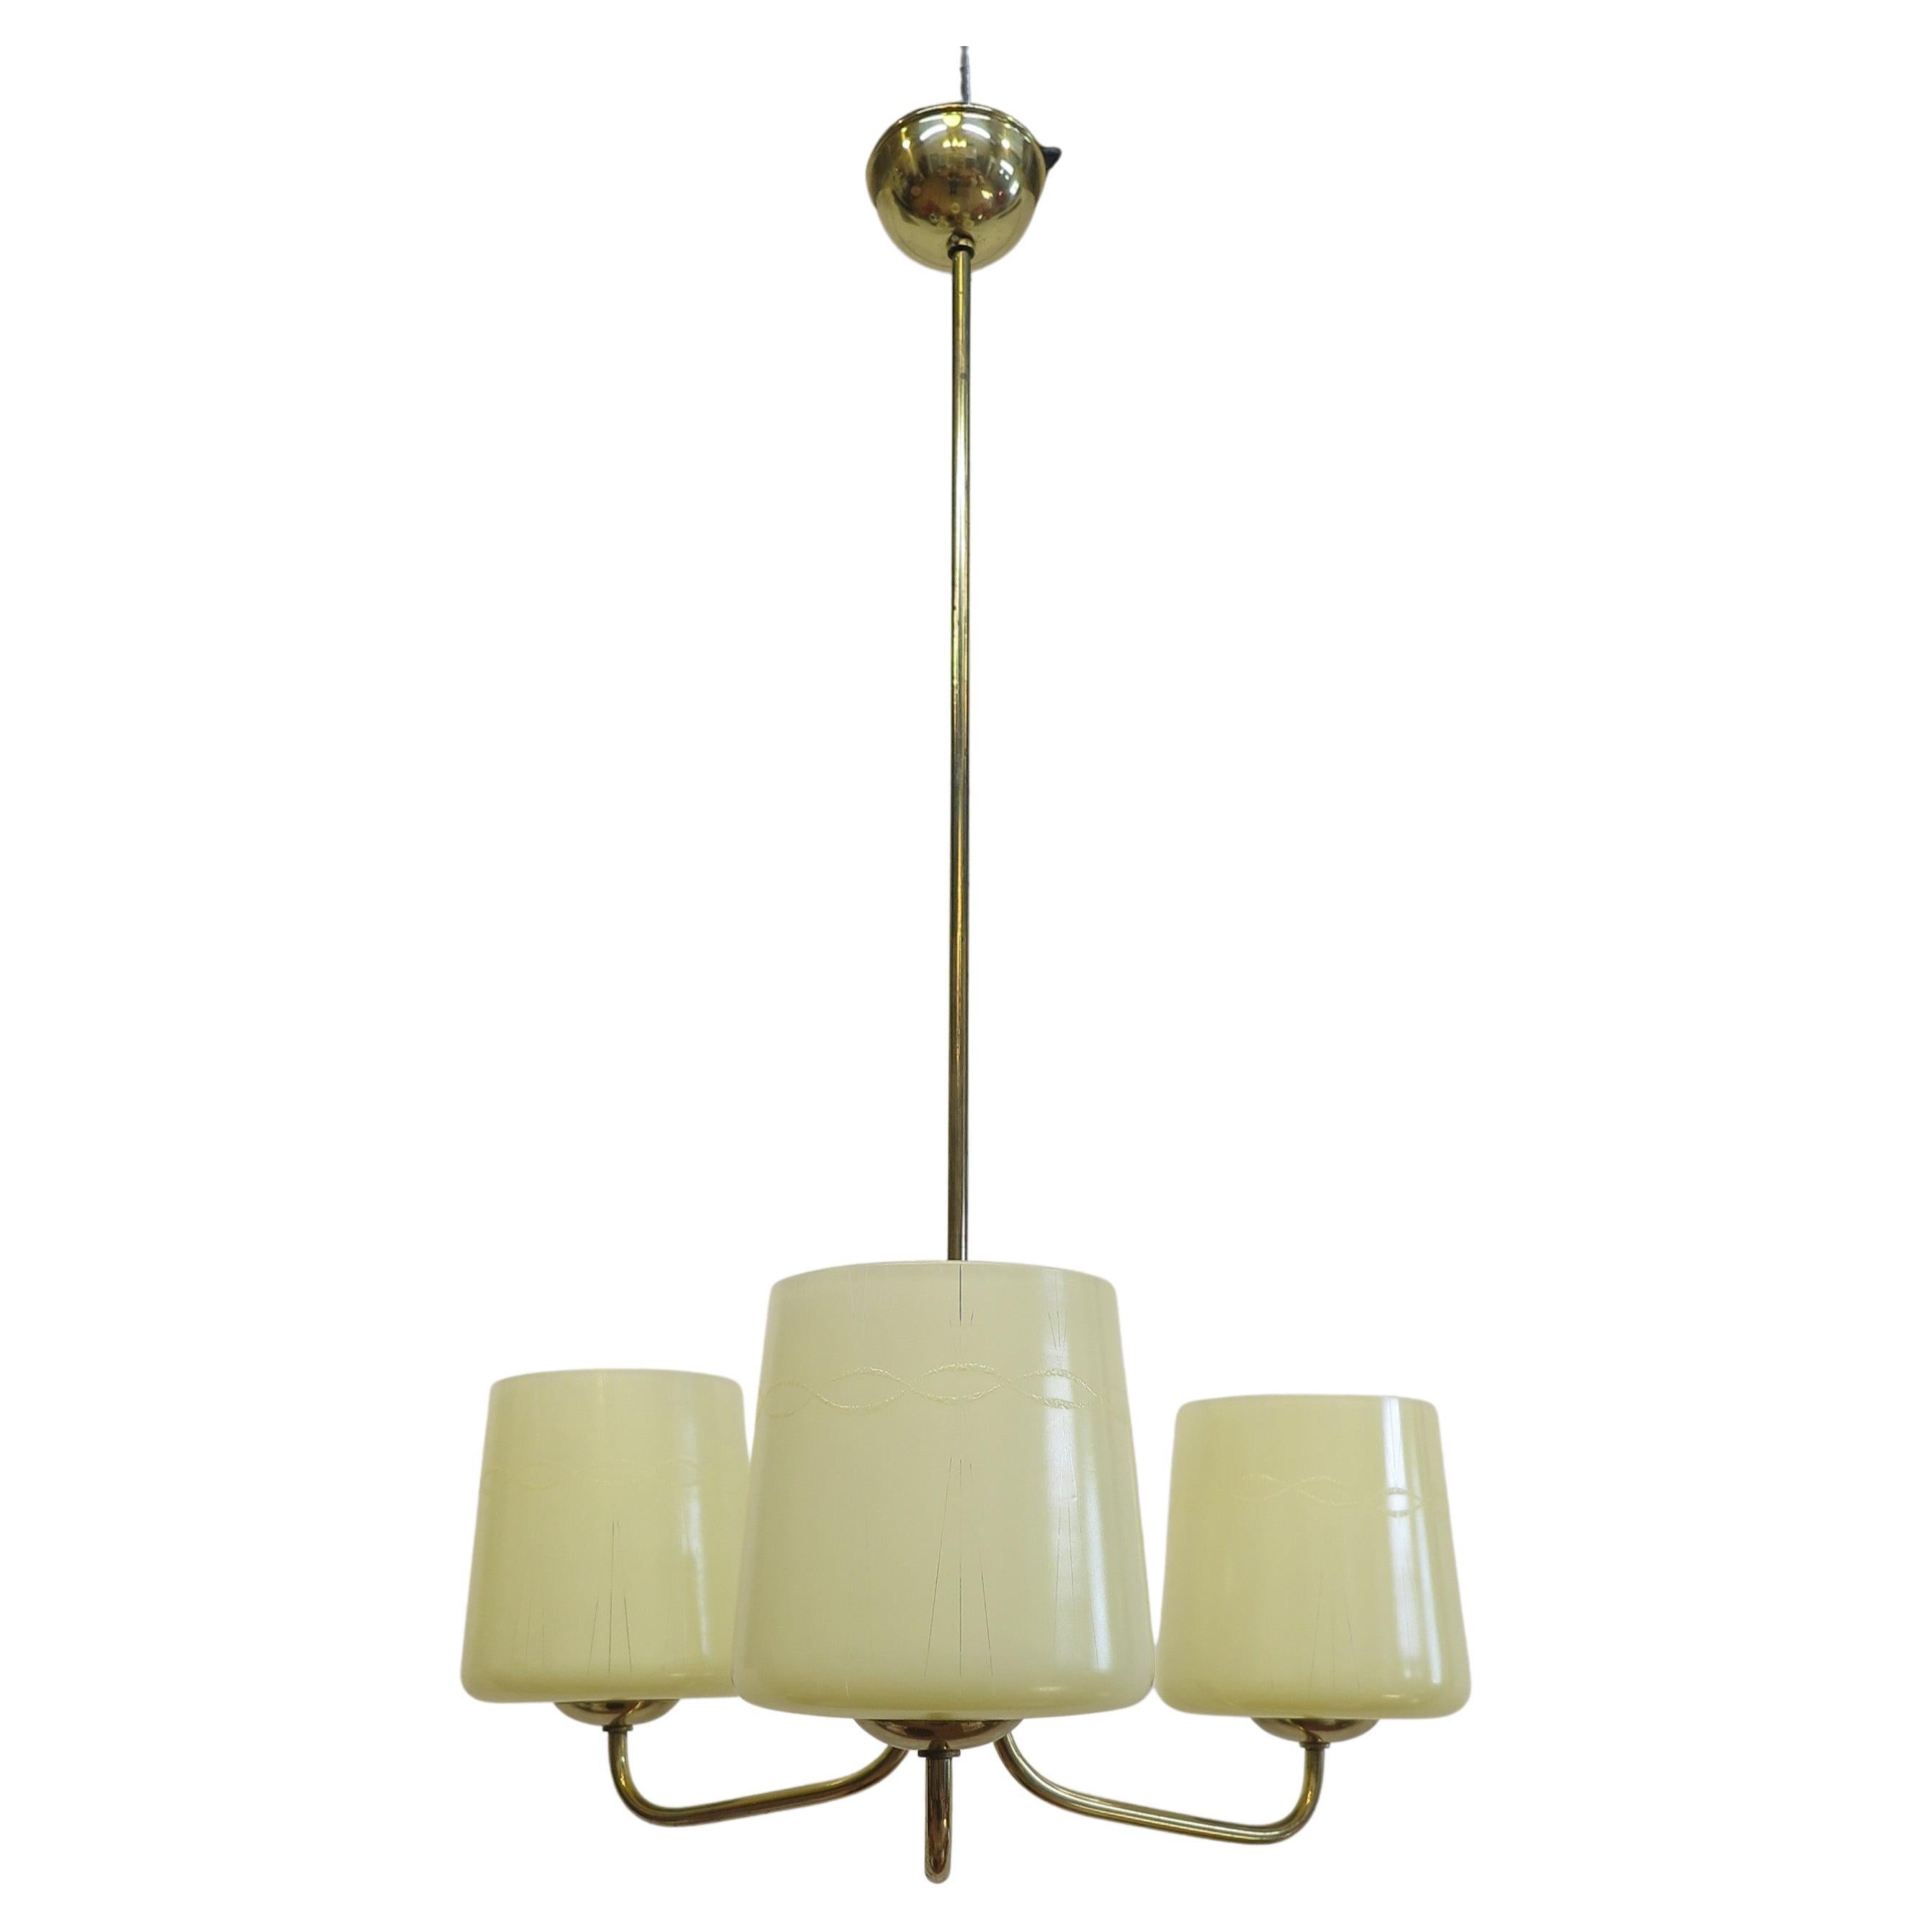 Austrian Mid-Century Modern brass and opaline glass chandelier. Three arm modernist brass chandelier with slightly tapered opaline glass shades having a light etched design. Elegant modernist lines of the arms supporting snifter styled glass shades.